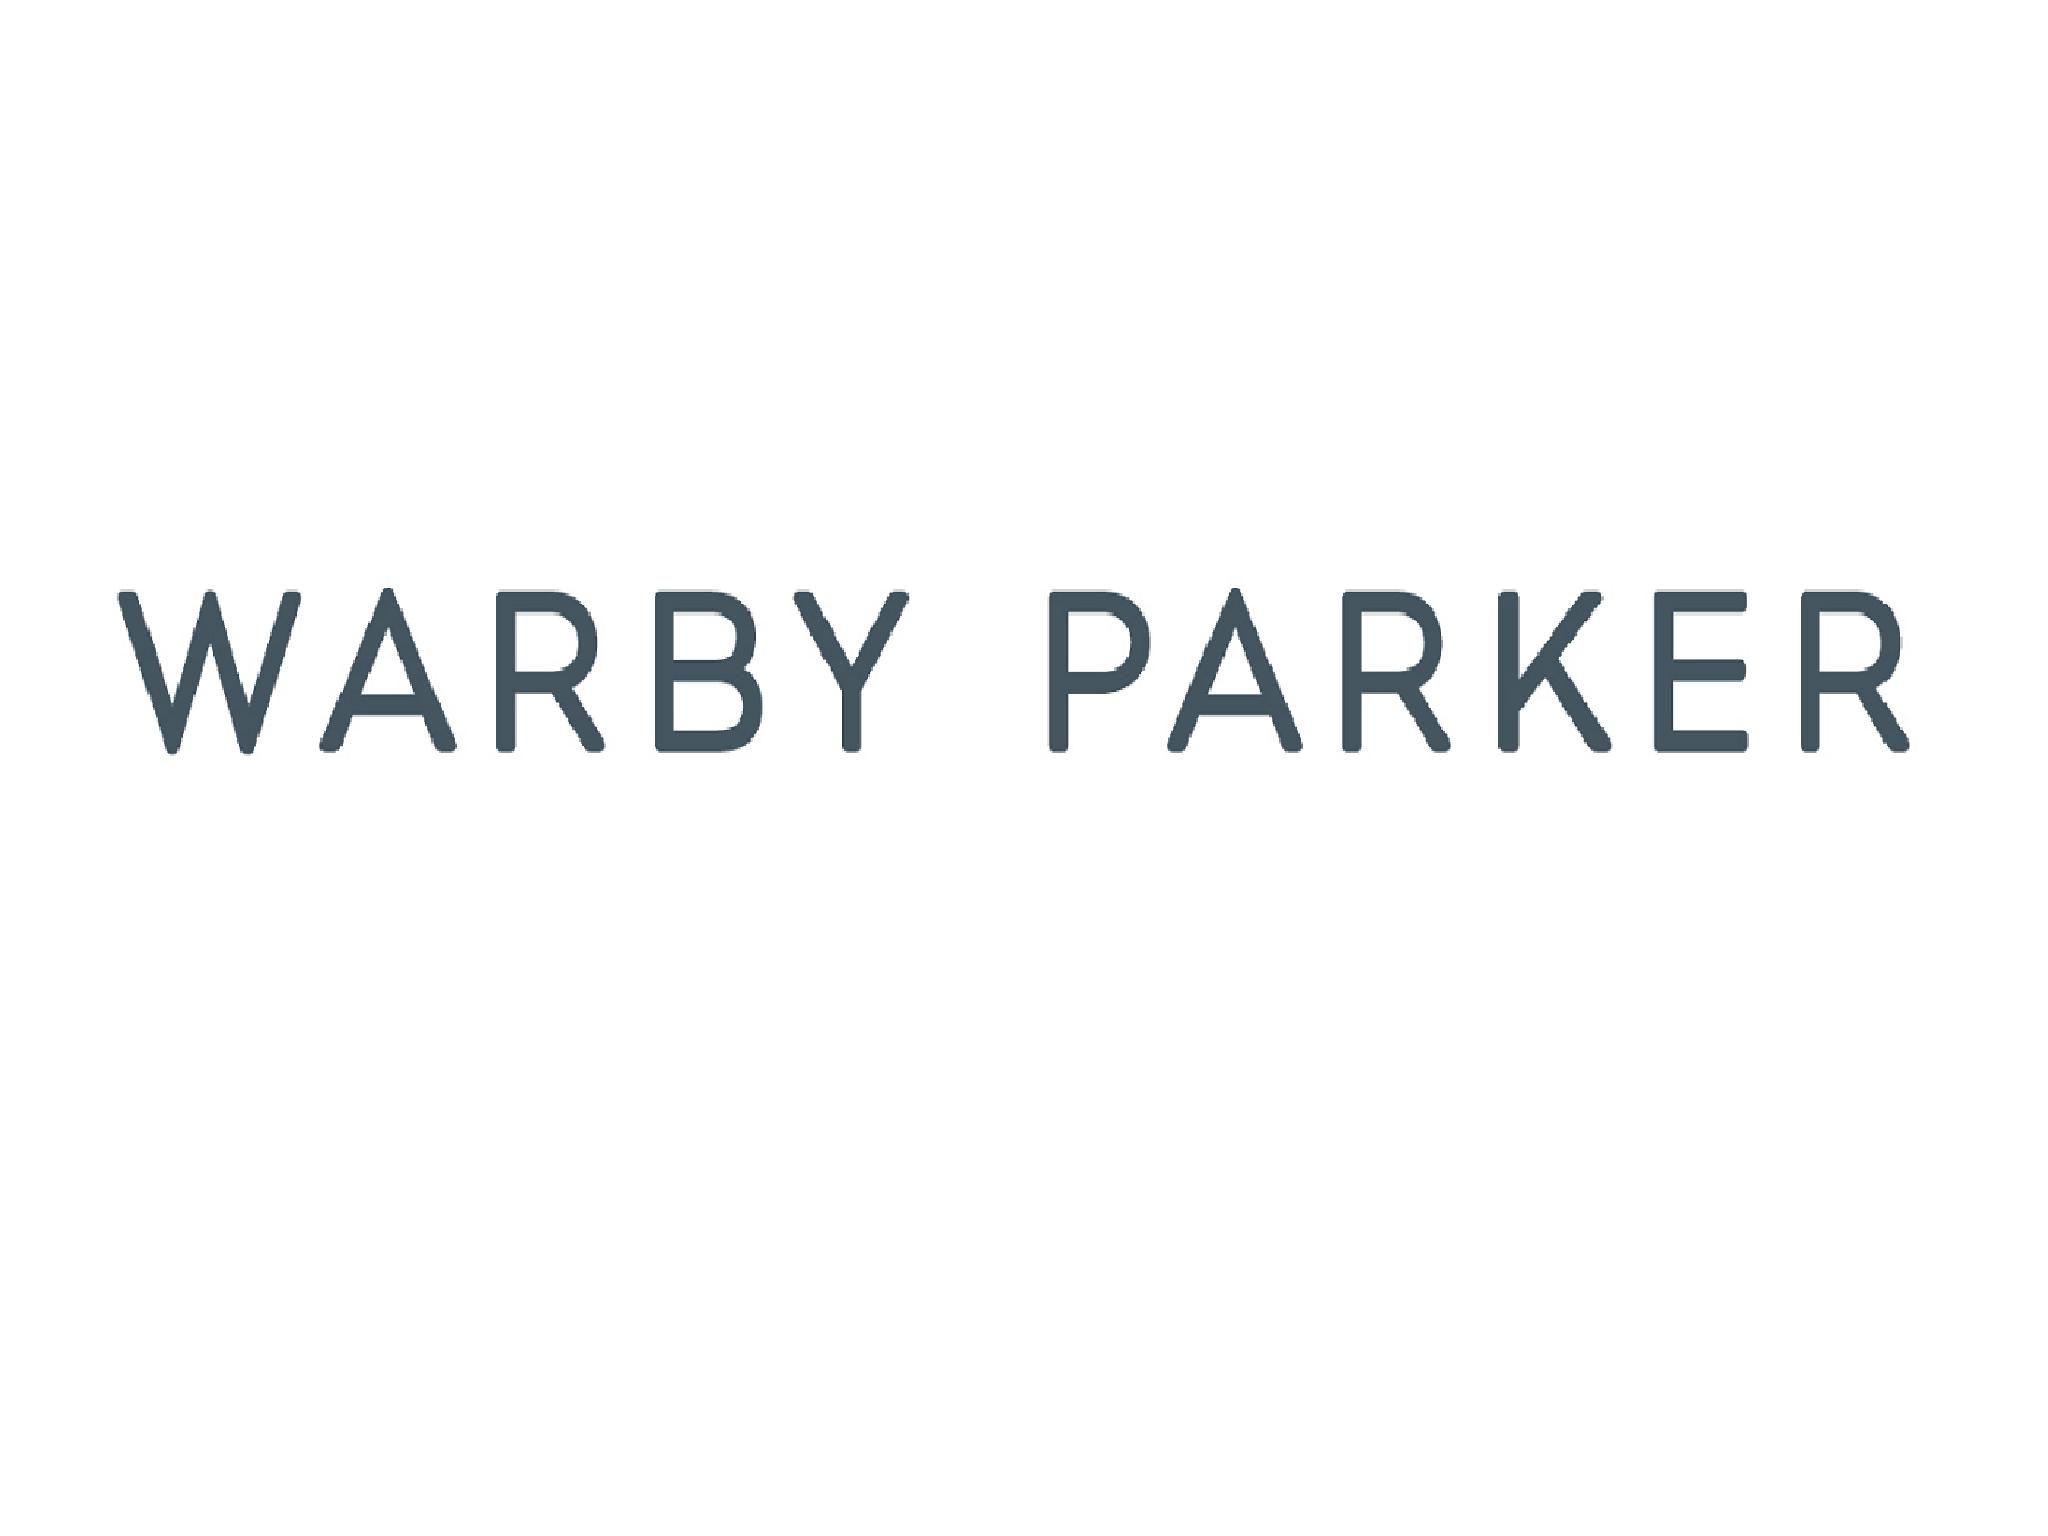 Warby Parker Logo - Total Leadership Cci_ts20130226174200